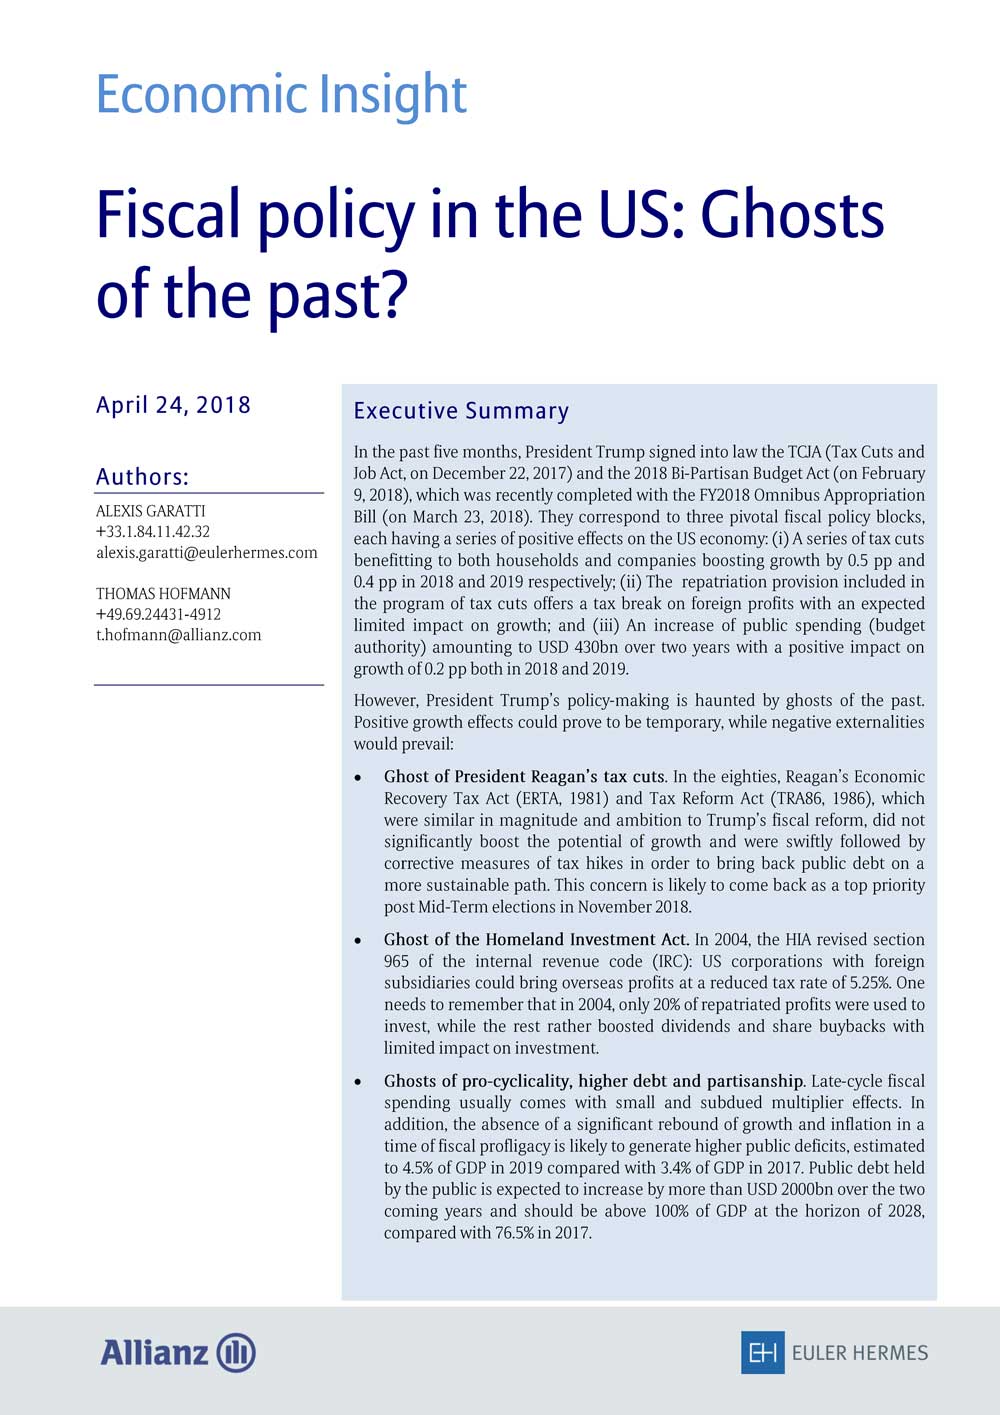 Fiscal policy in the US: Ghosts of the past?